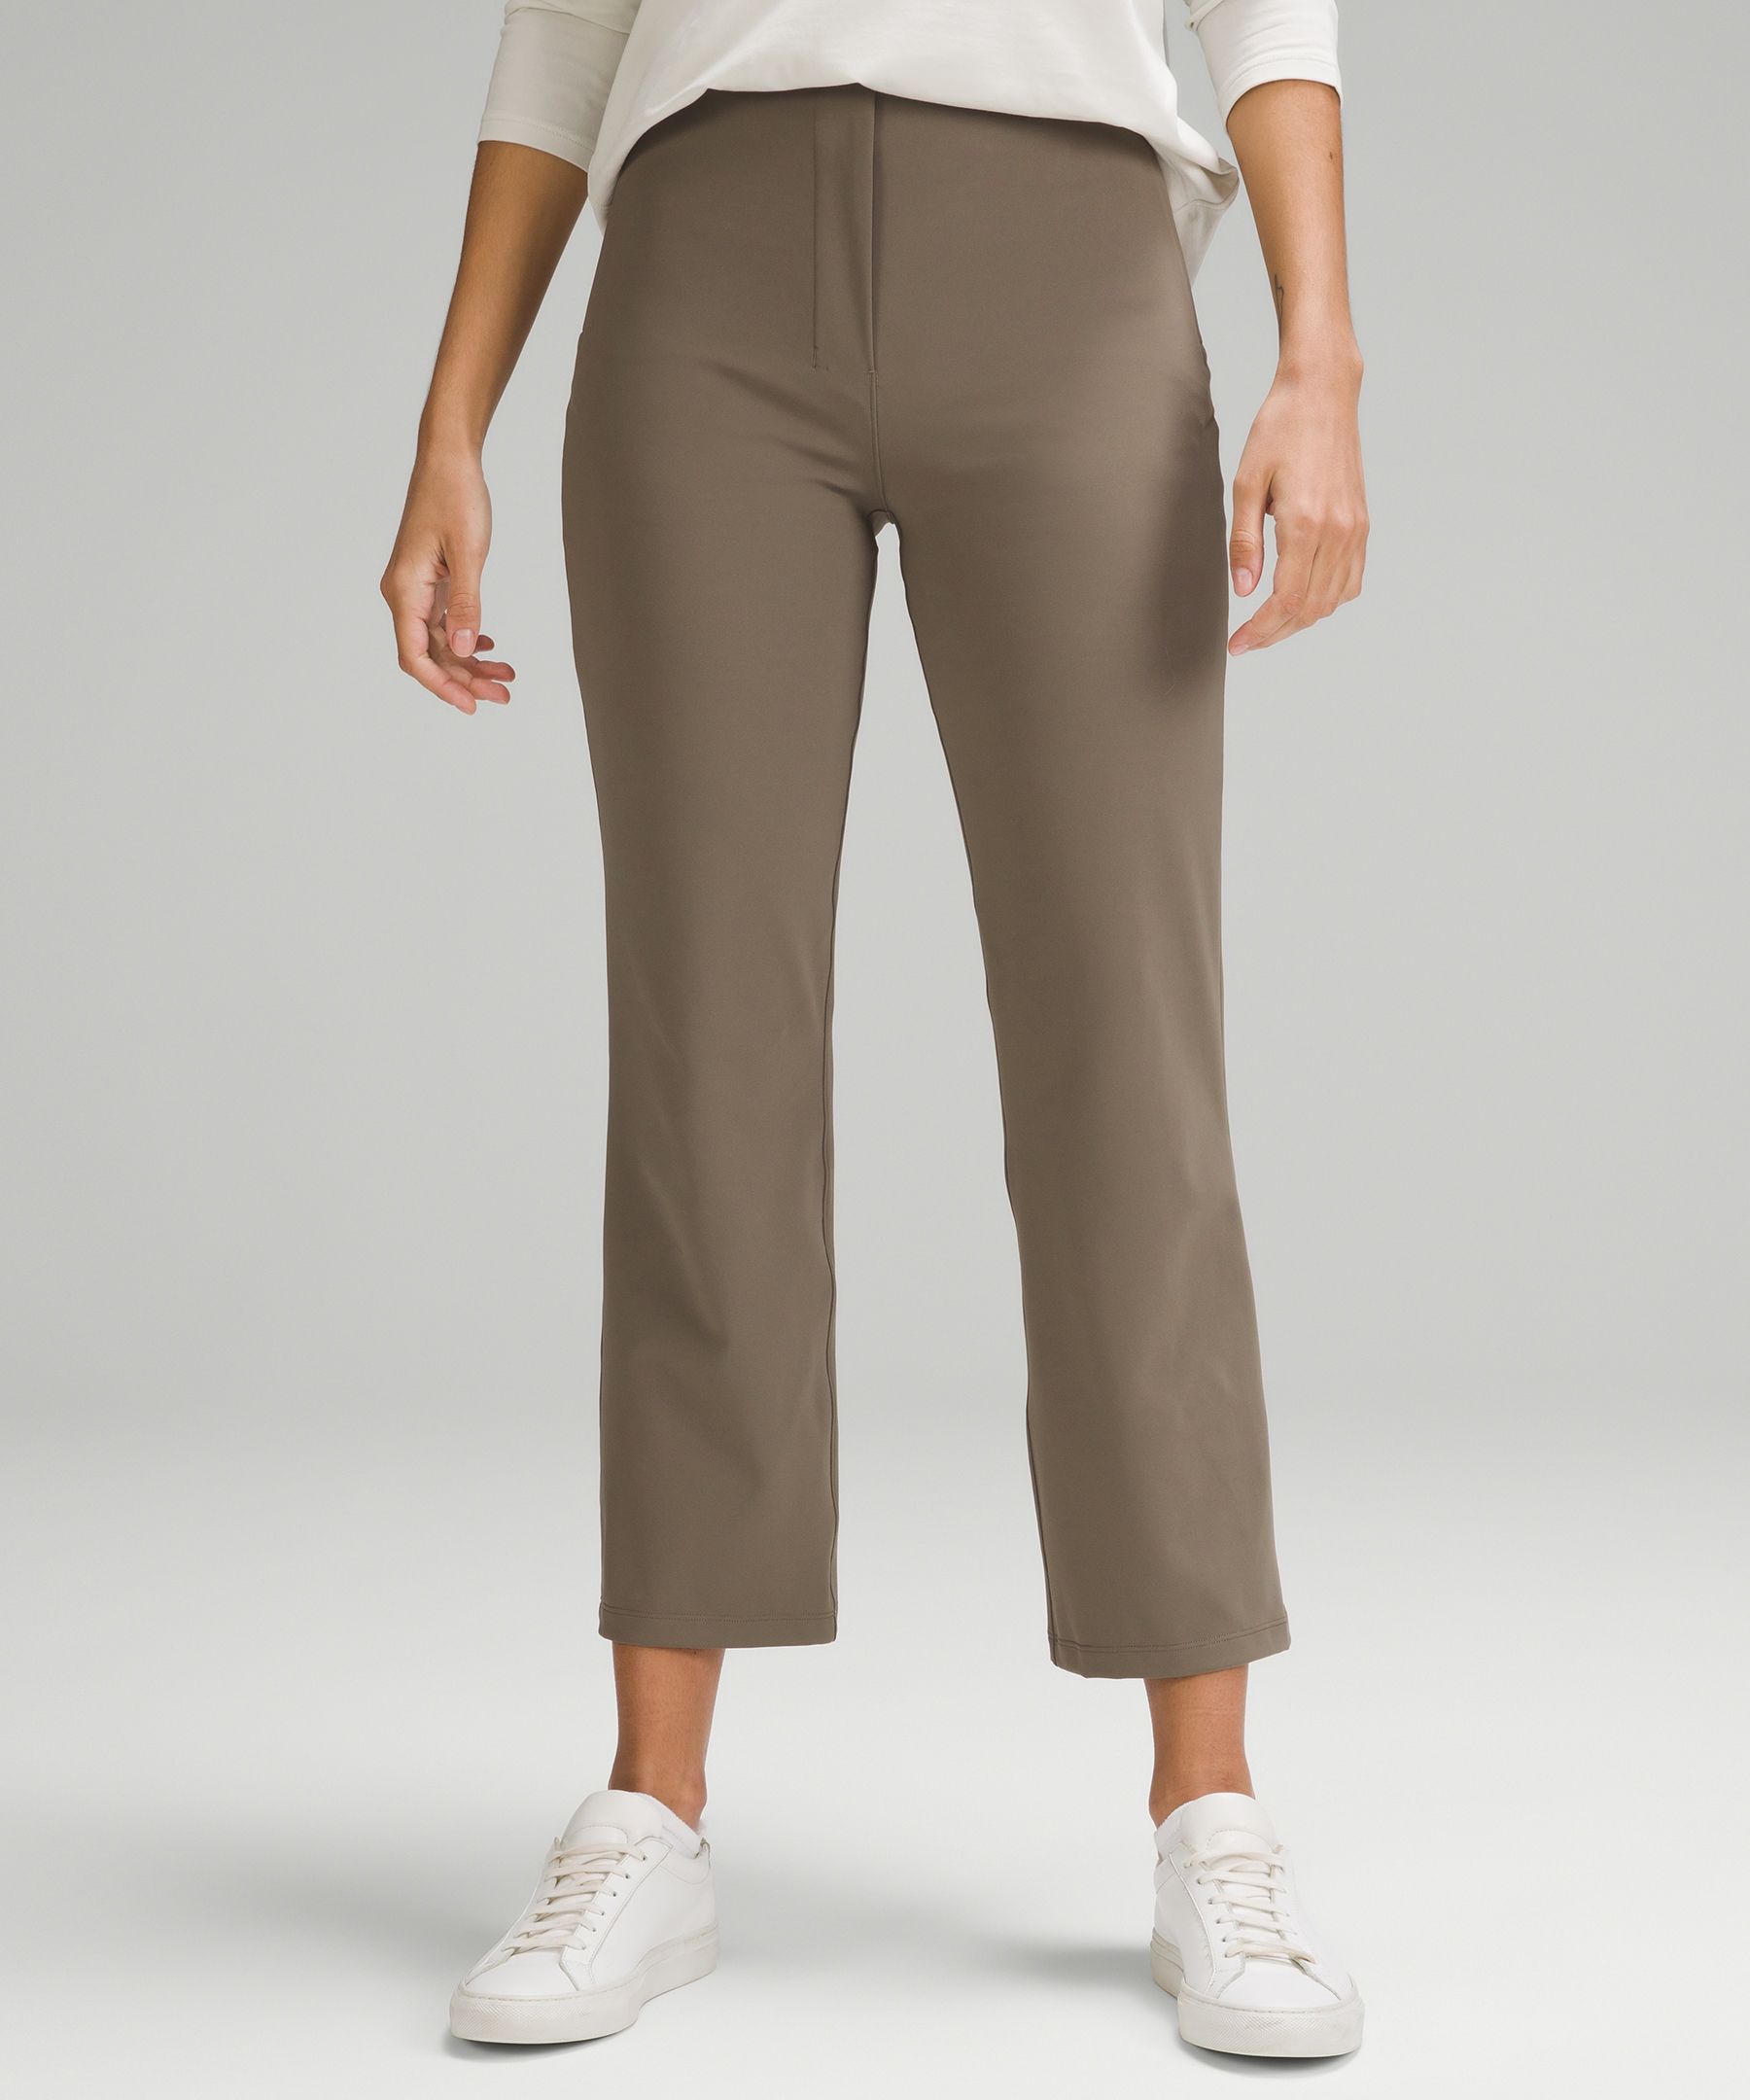 lululemon athletica Smooth Fit Pull-on High-rise Cropped Pants in Natural